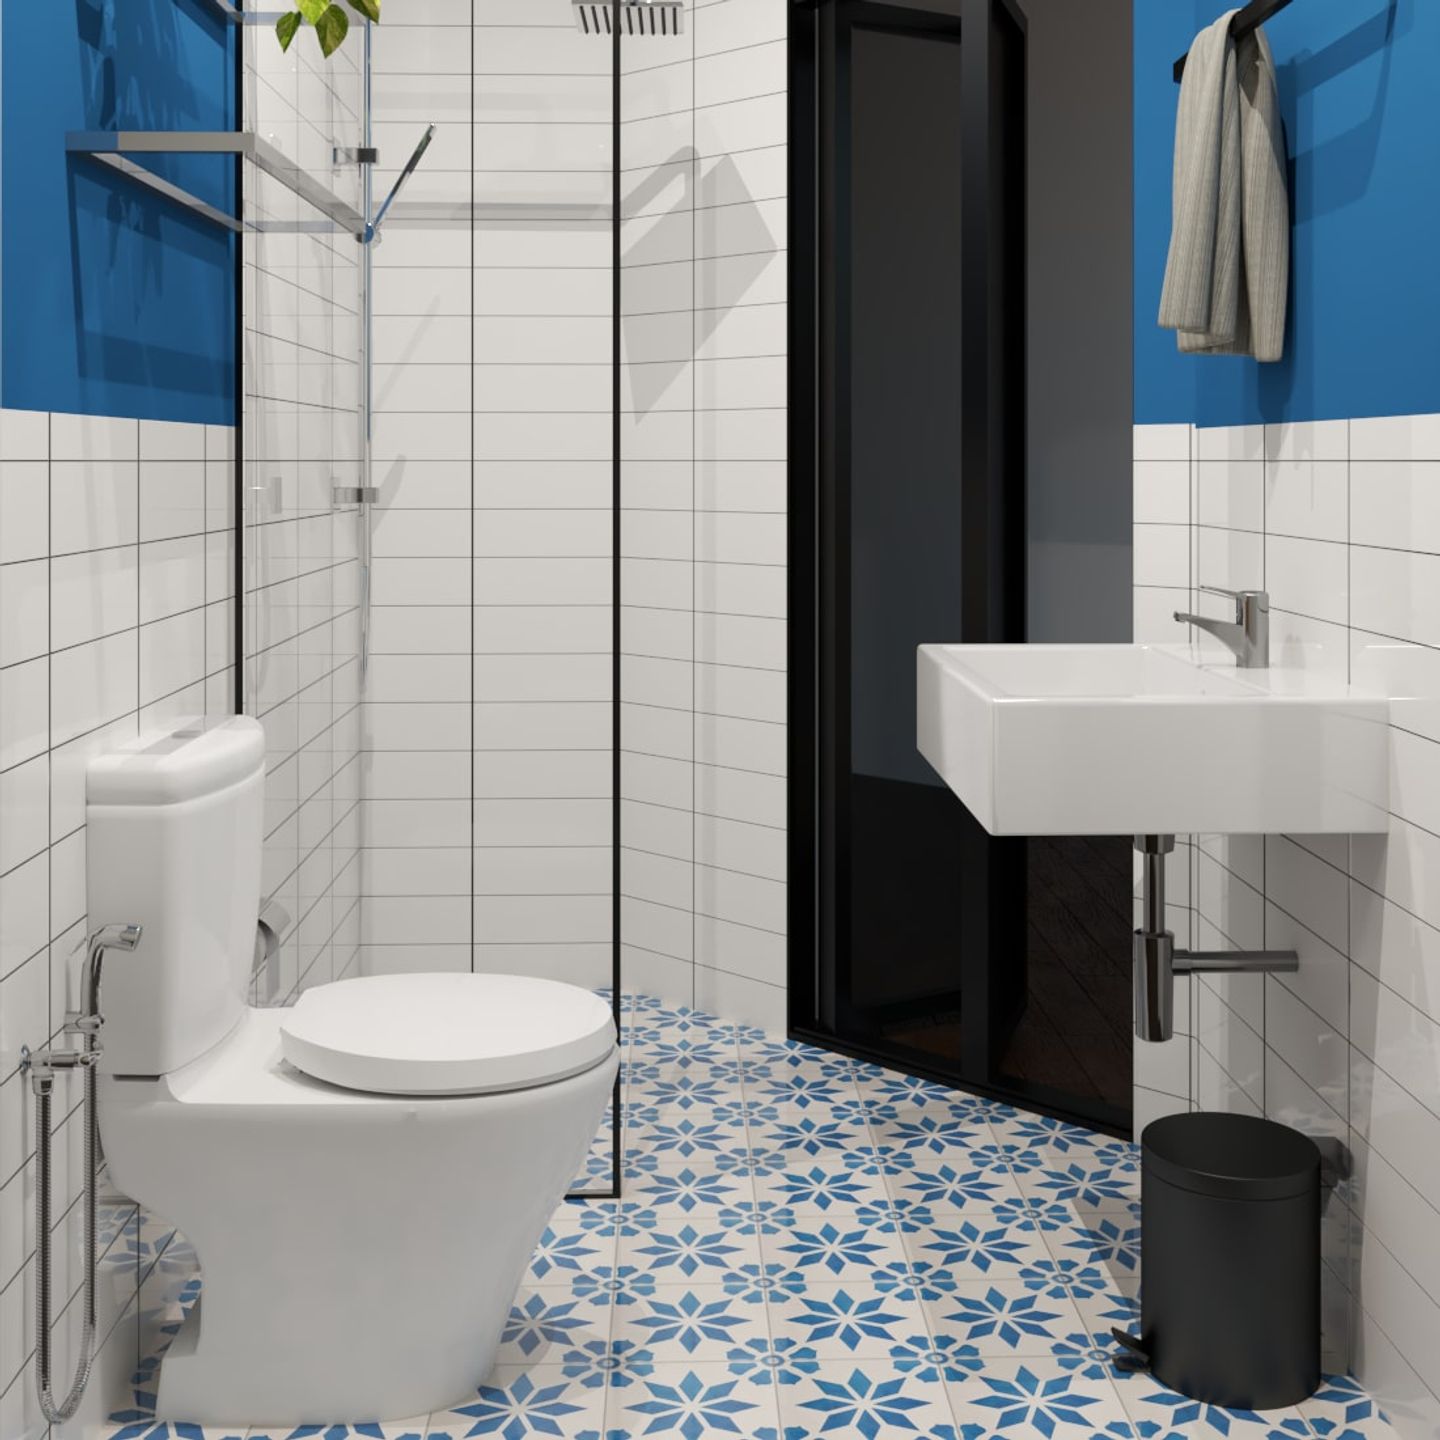 Cool-Toned Design For Compact Bathrooms - Livspace